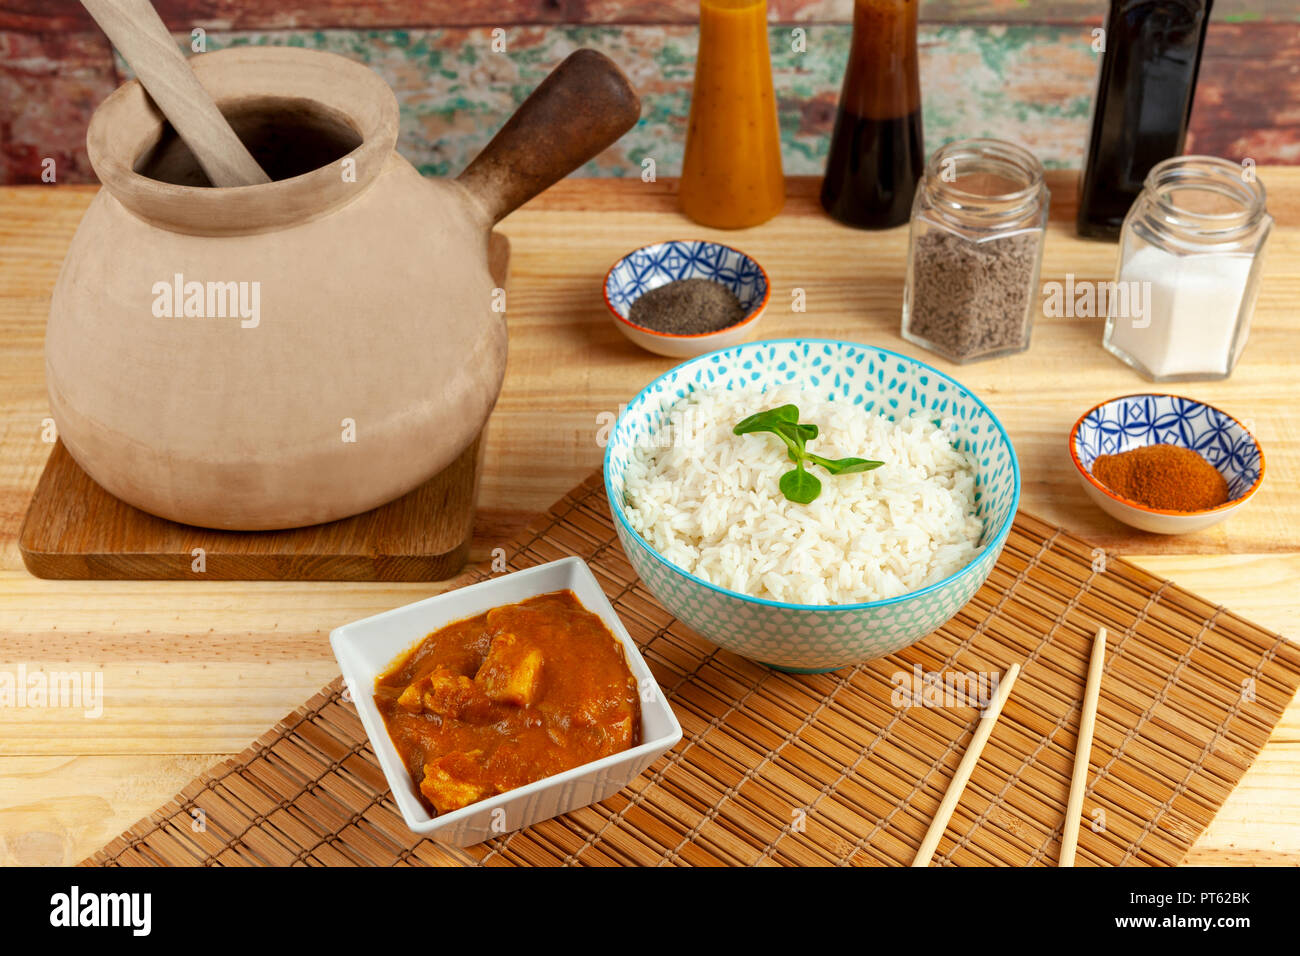 Bowl of rice and a portion of chicken curry laid out on a bamboo mat along side a traditional Chinese cooking pot and condiments on a wooden table Stock Photo